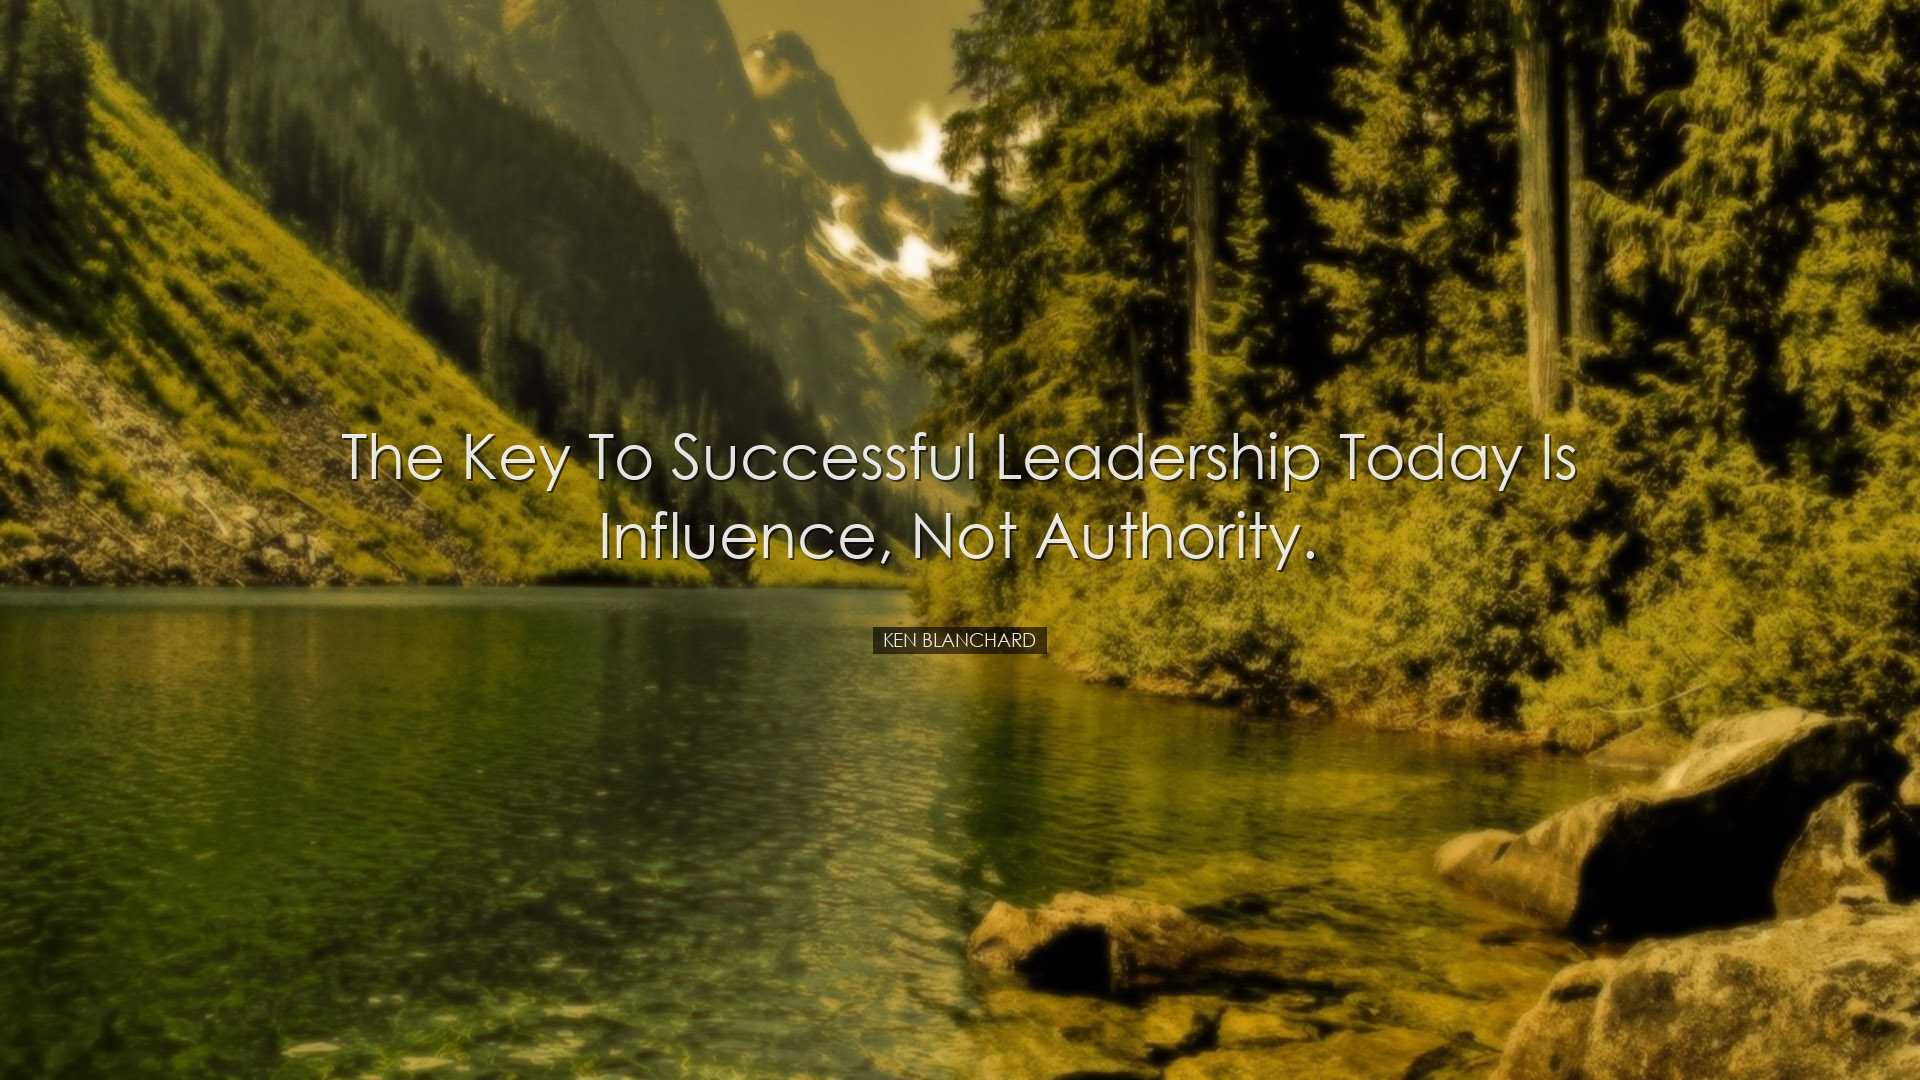 The key to successful leadership today is influence, not authority